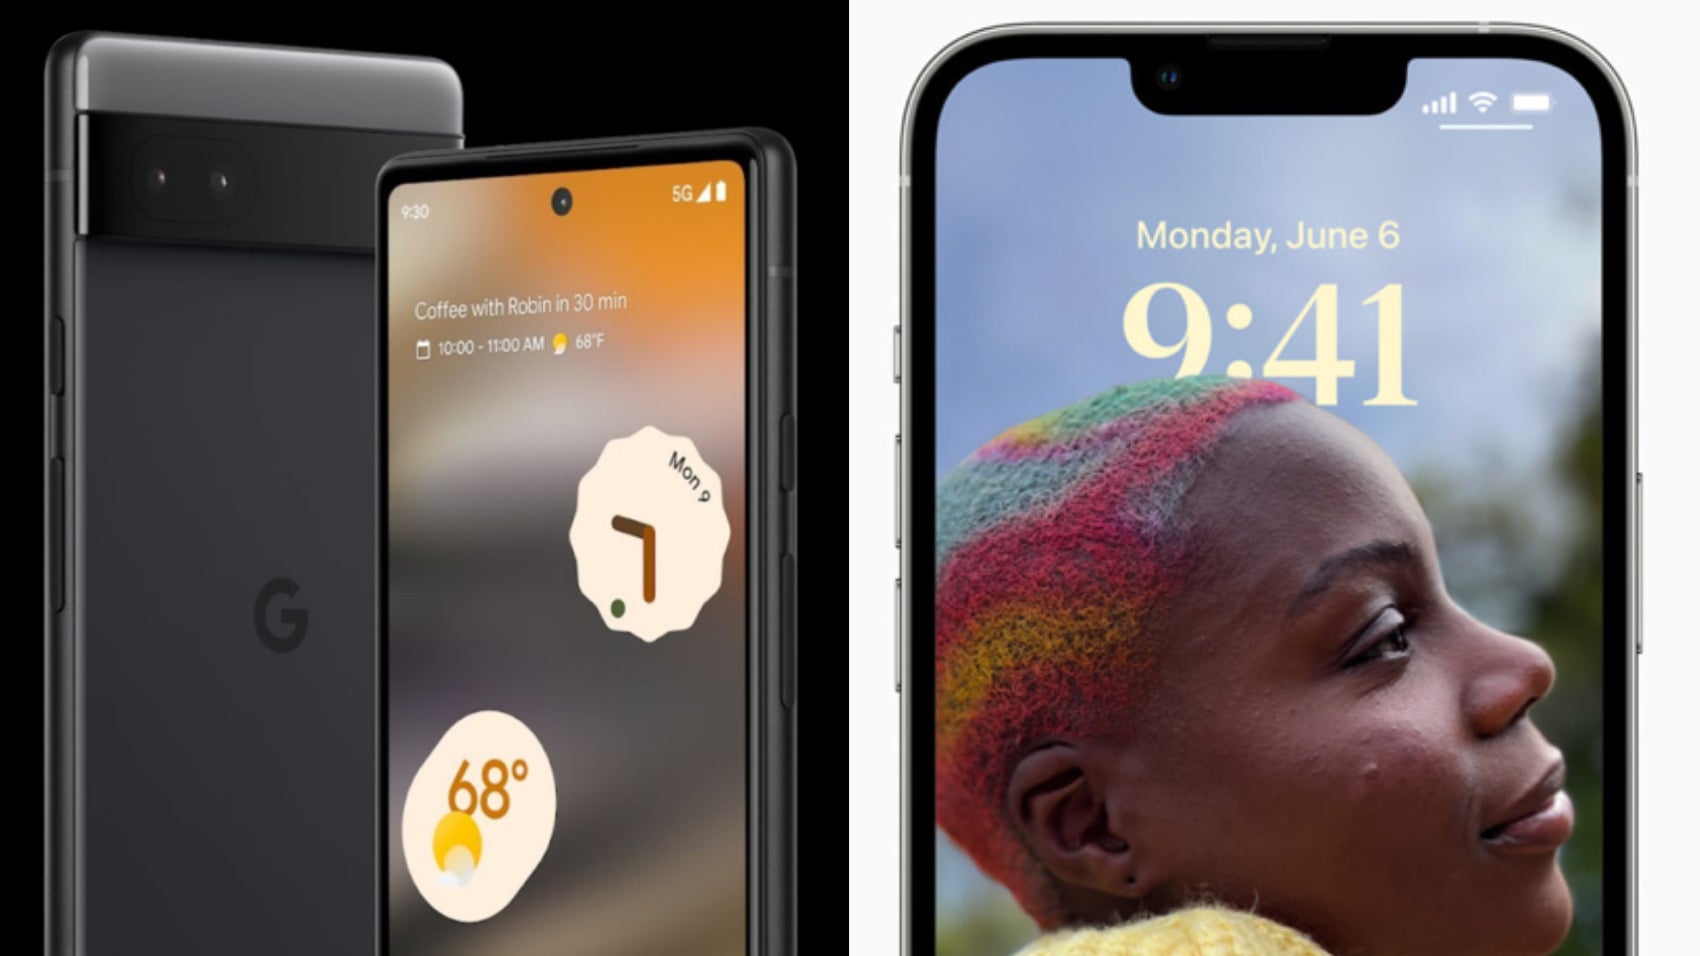 Both the Pixel 6a and iPhone 13 have 60Hz screens but the iPhone feels noticeably smoother. - iPhone 16 raises questions about the &quot;biggest&quot; iPhone problem - Apple users don’t care?